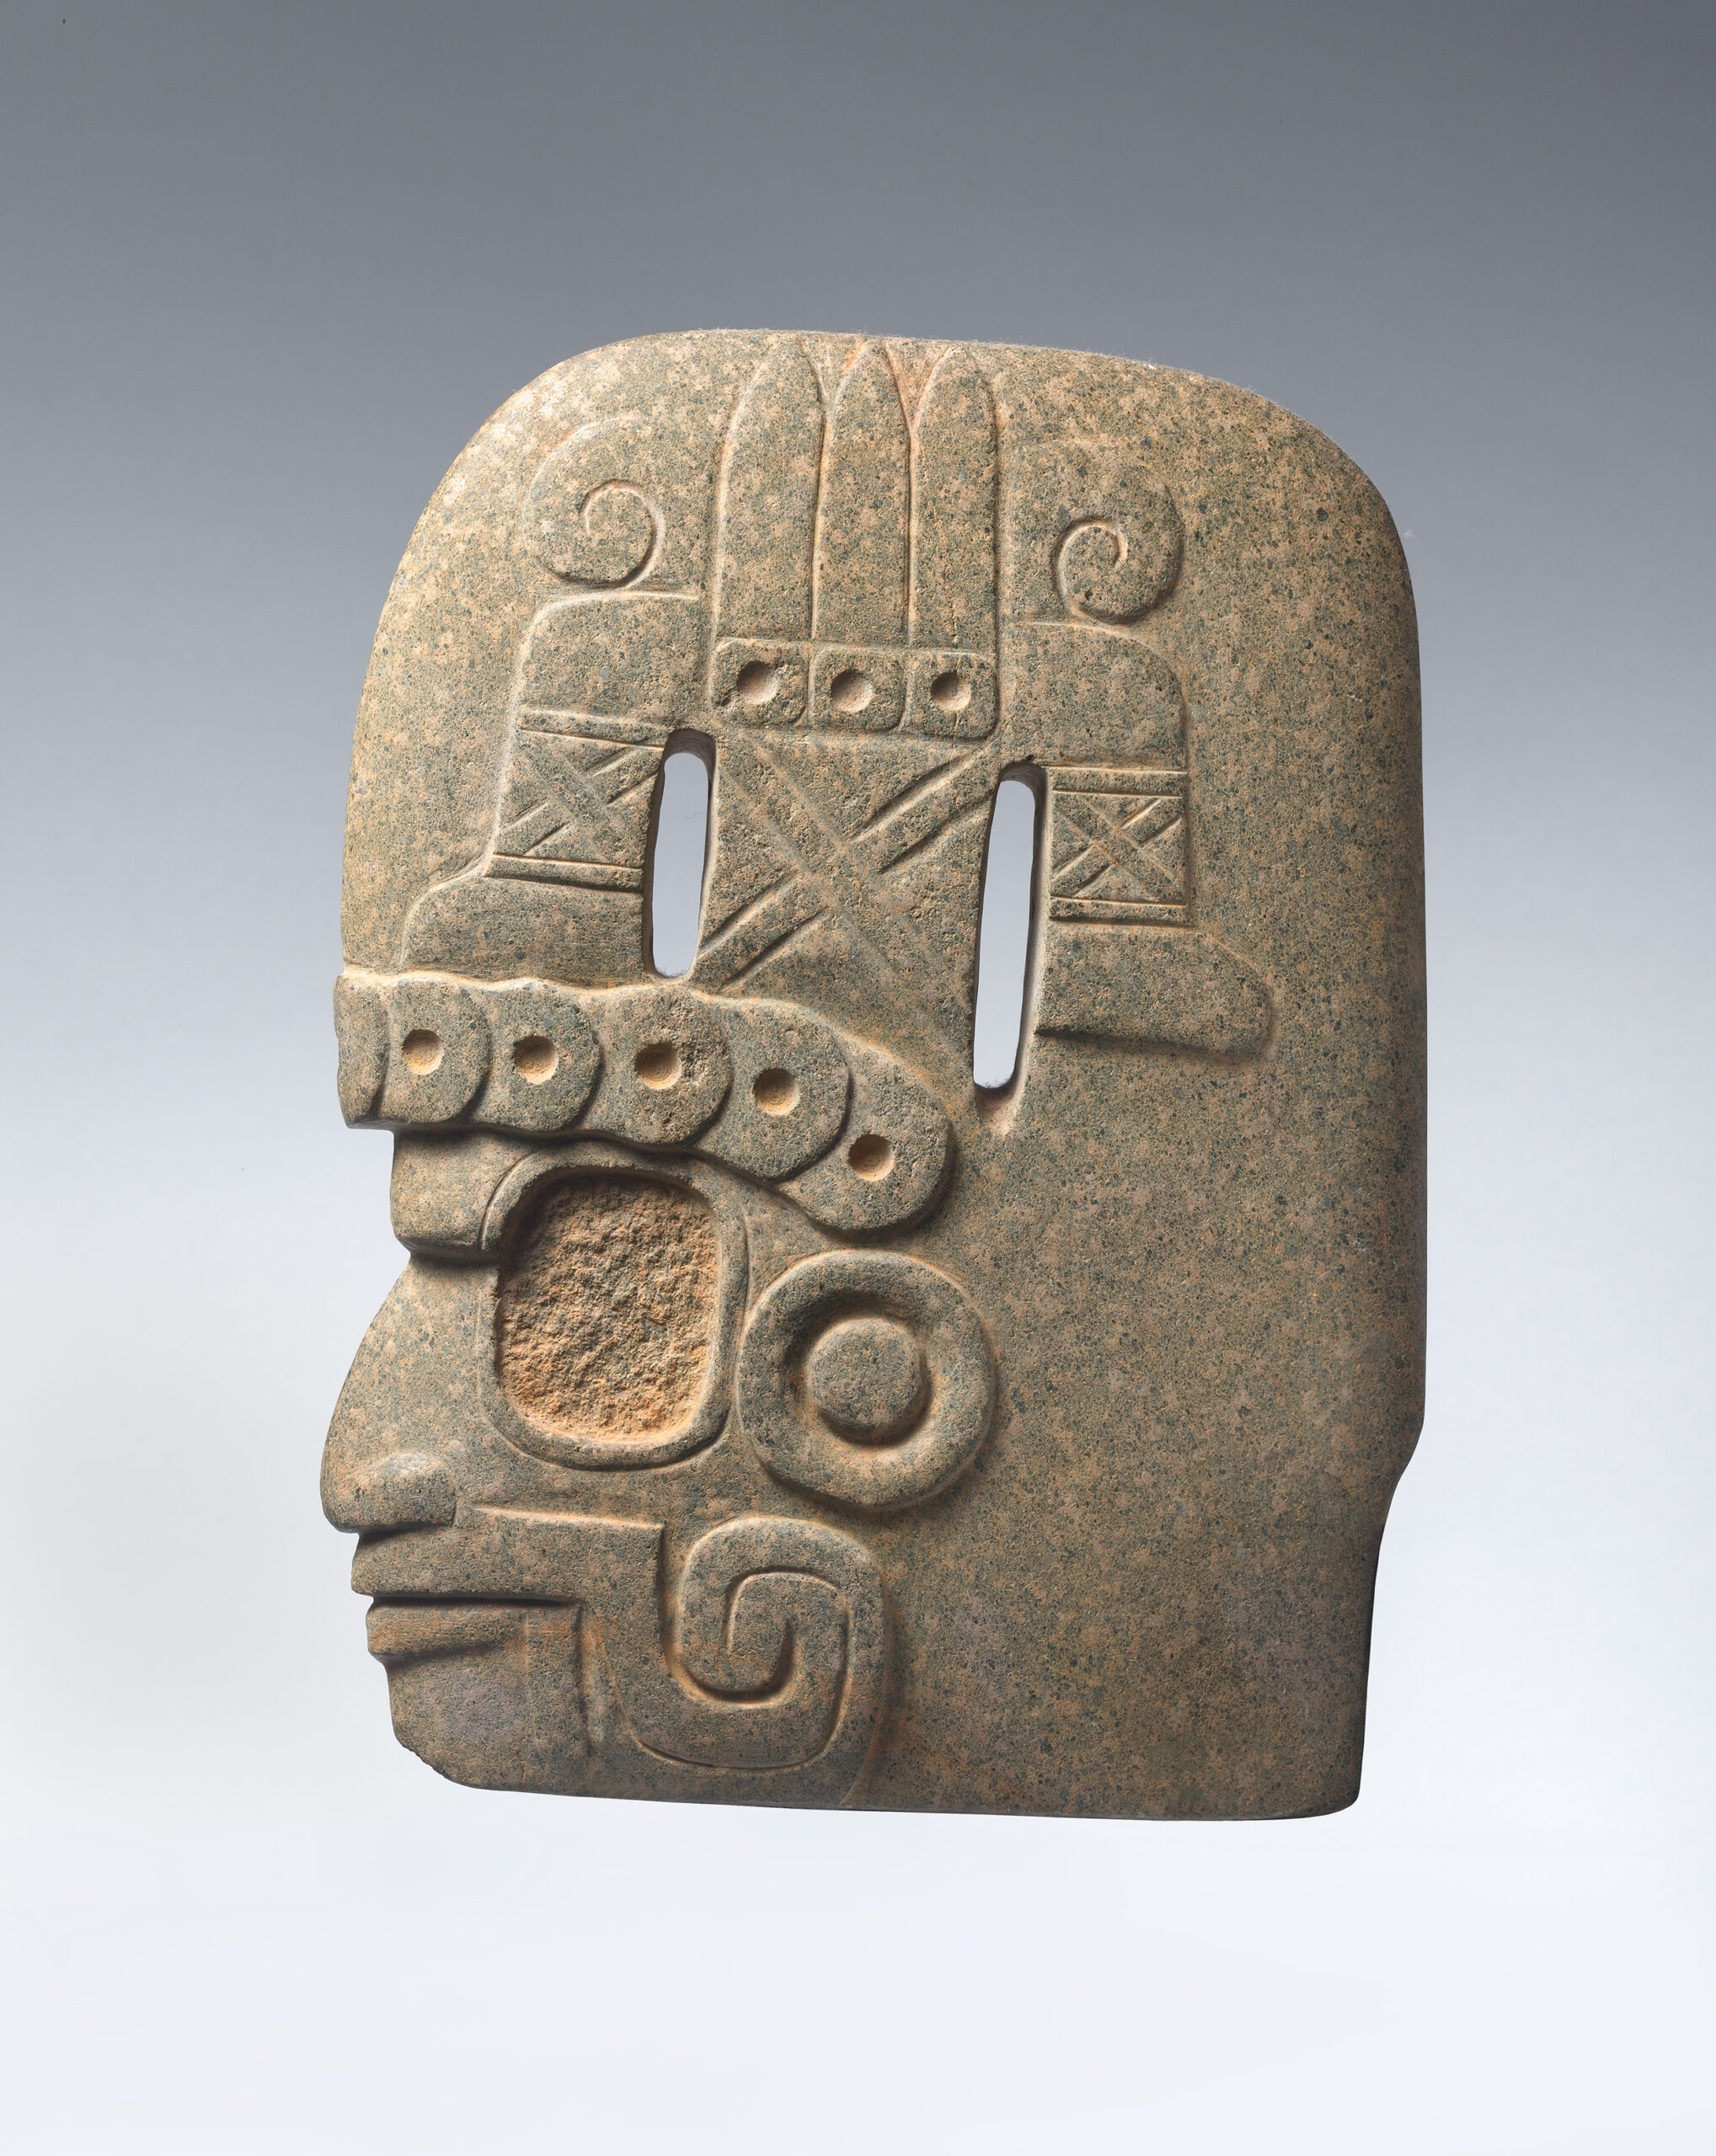 Flat stone carving of human face shown in profile with elaborate headpiece.